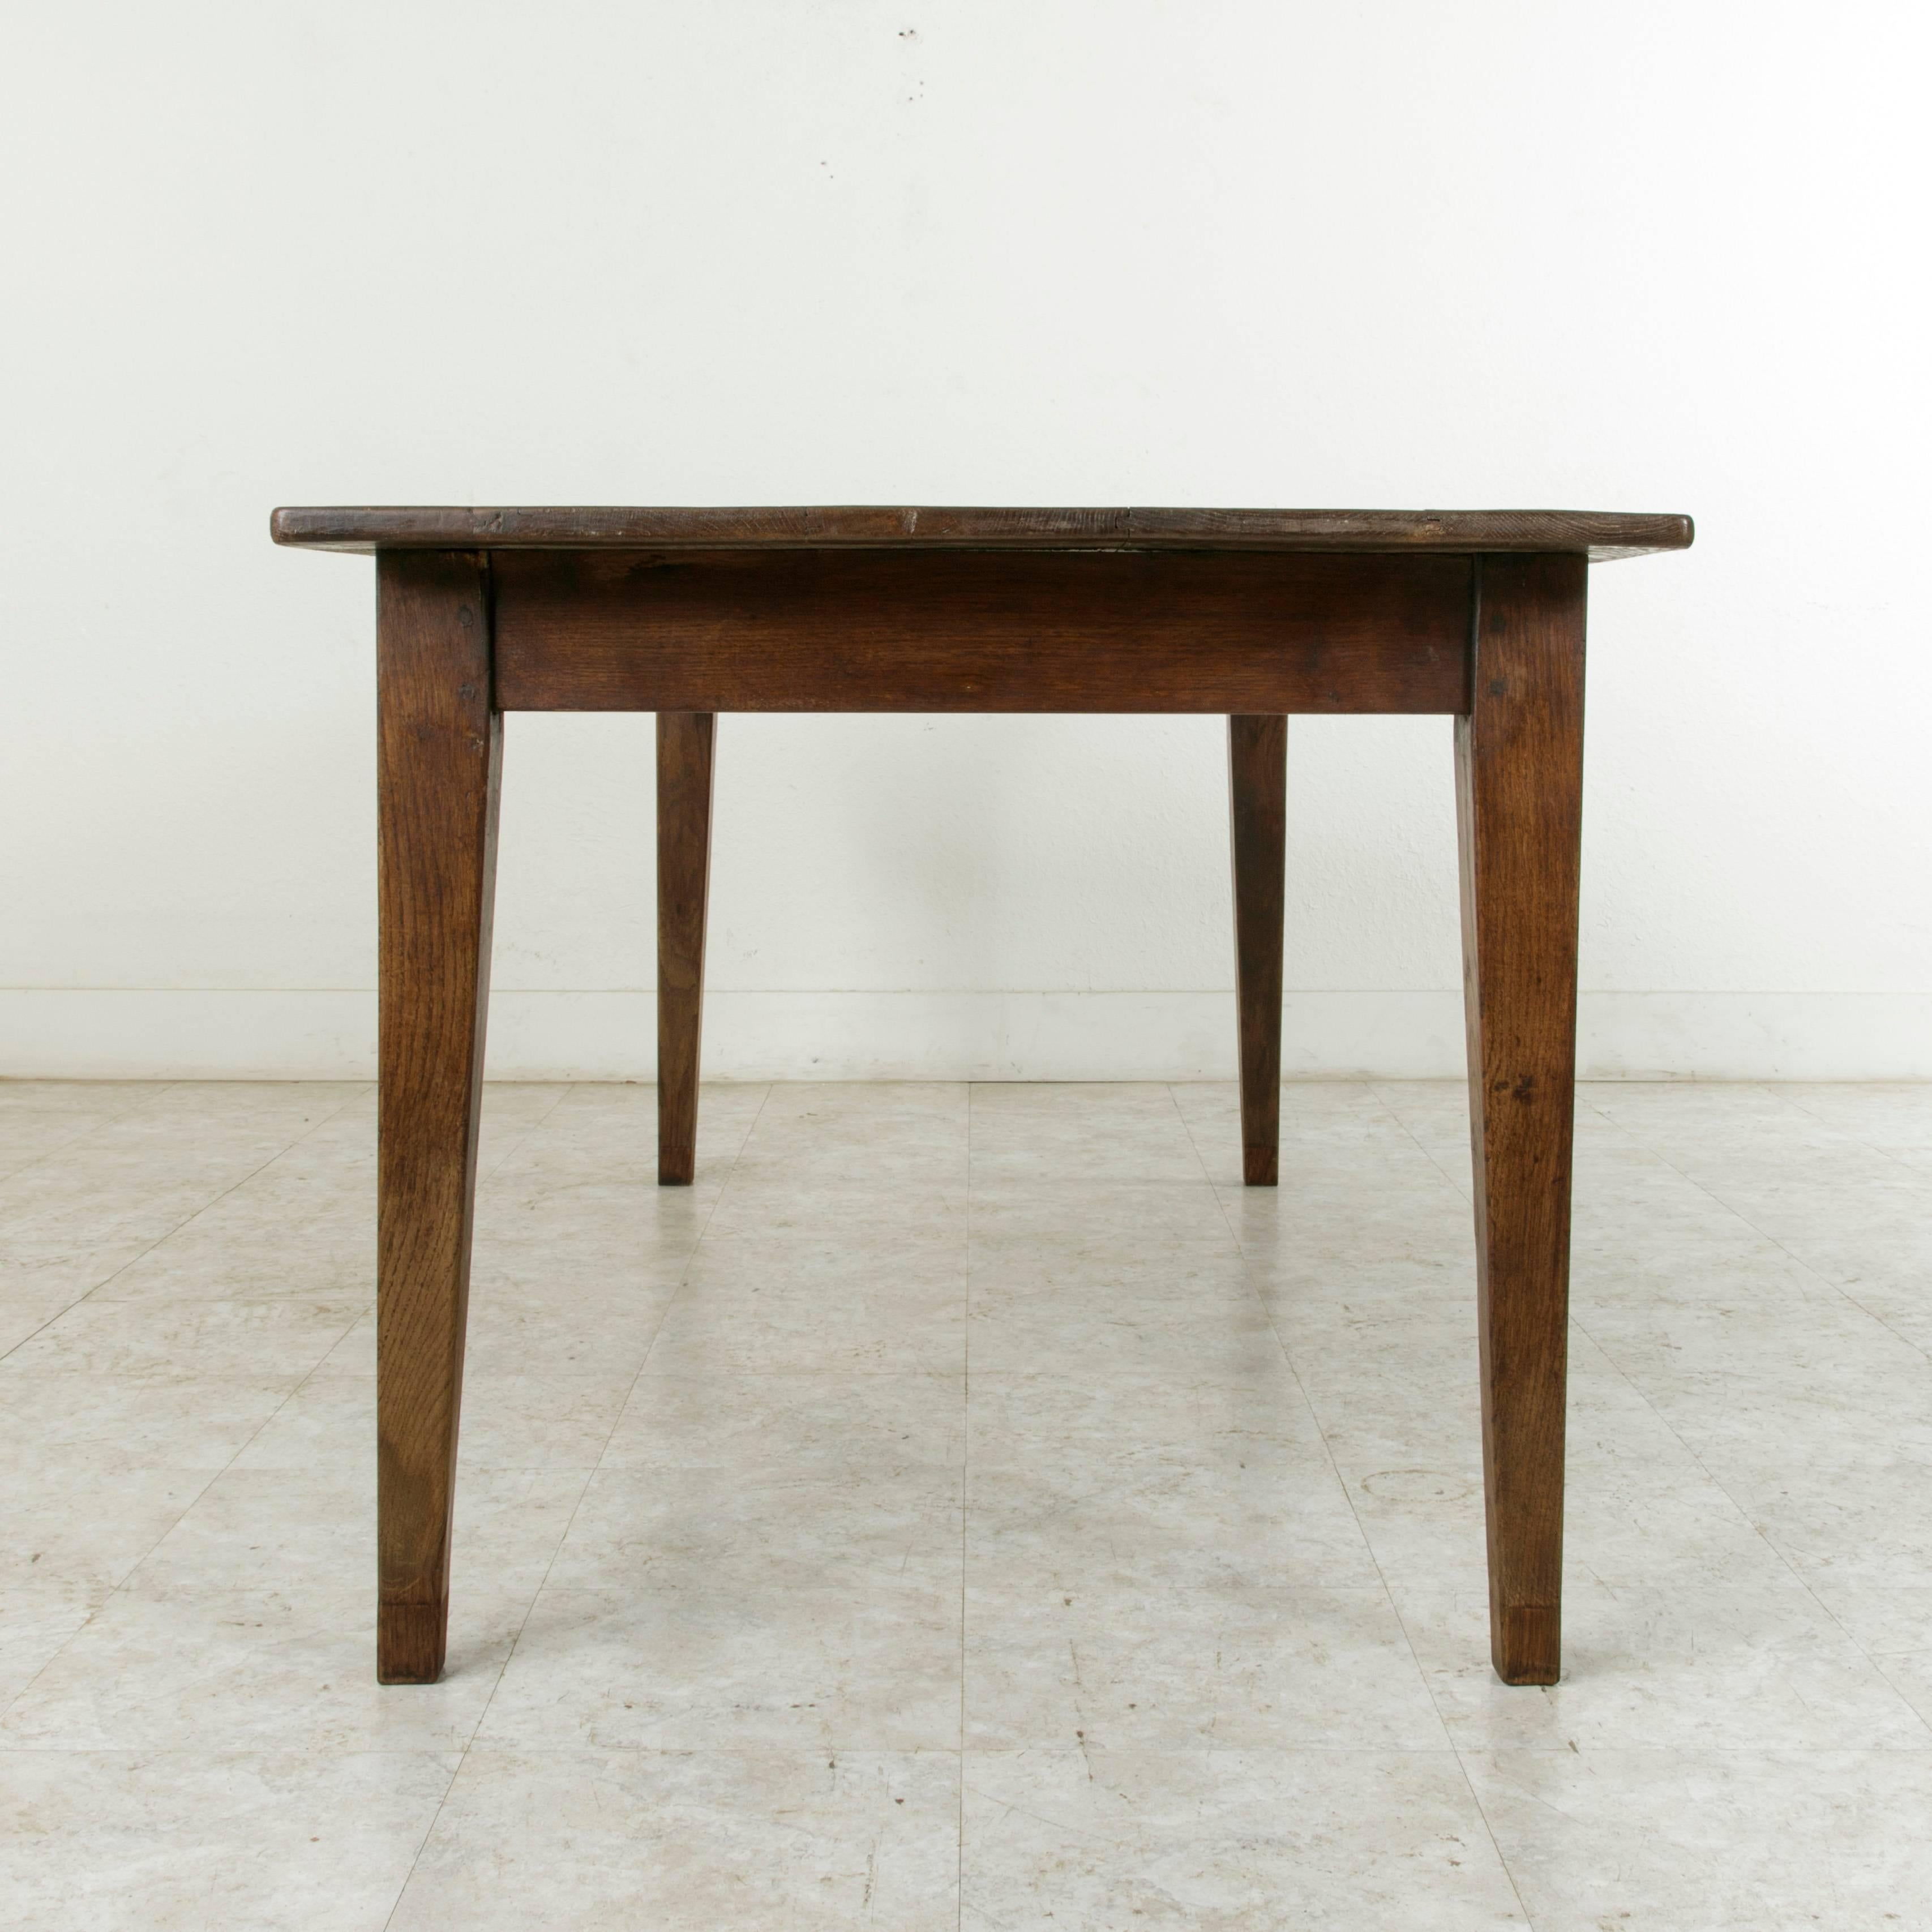 Early 20th Century French Oak Farm Table, Dining Table with Drawer from Normandy 2